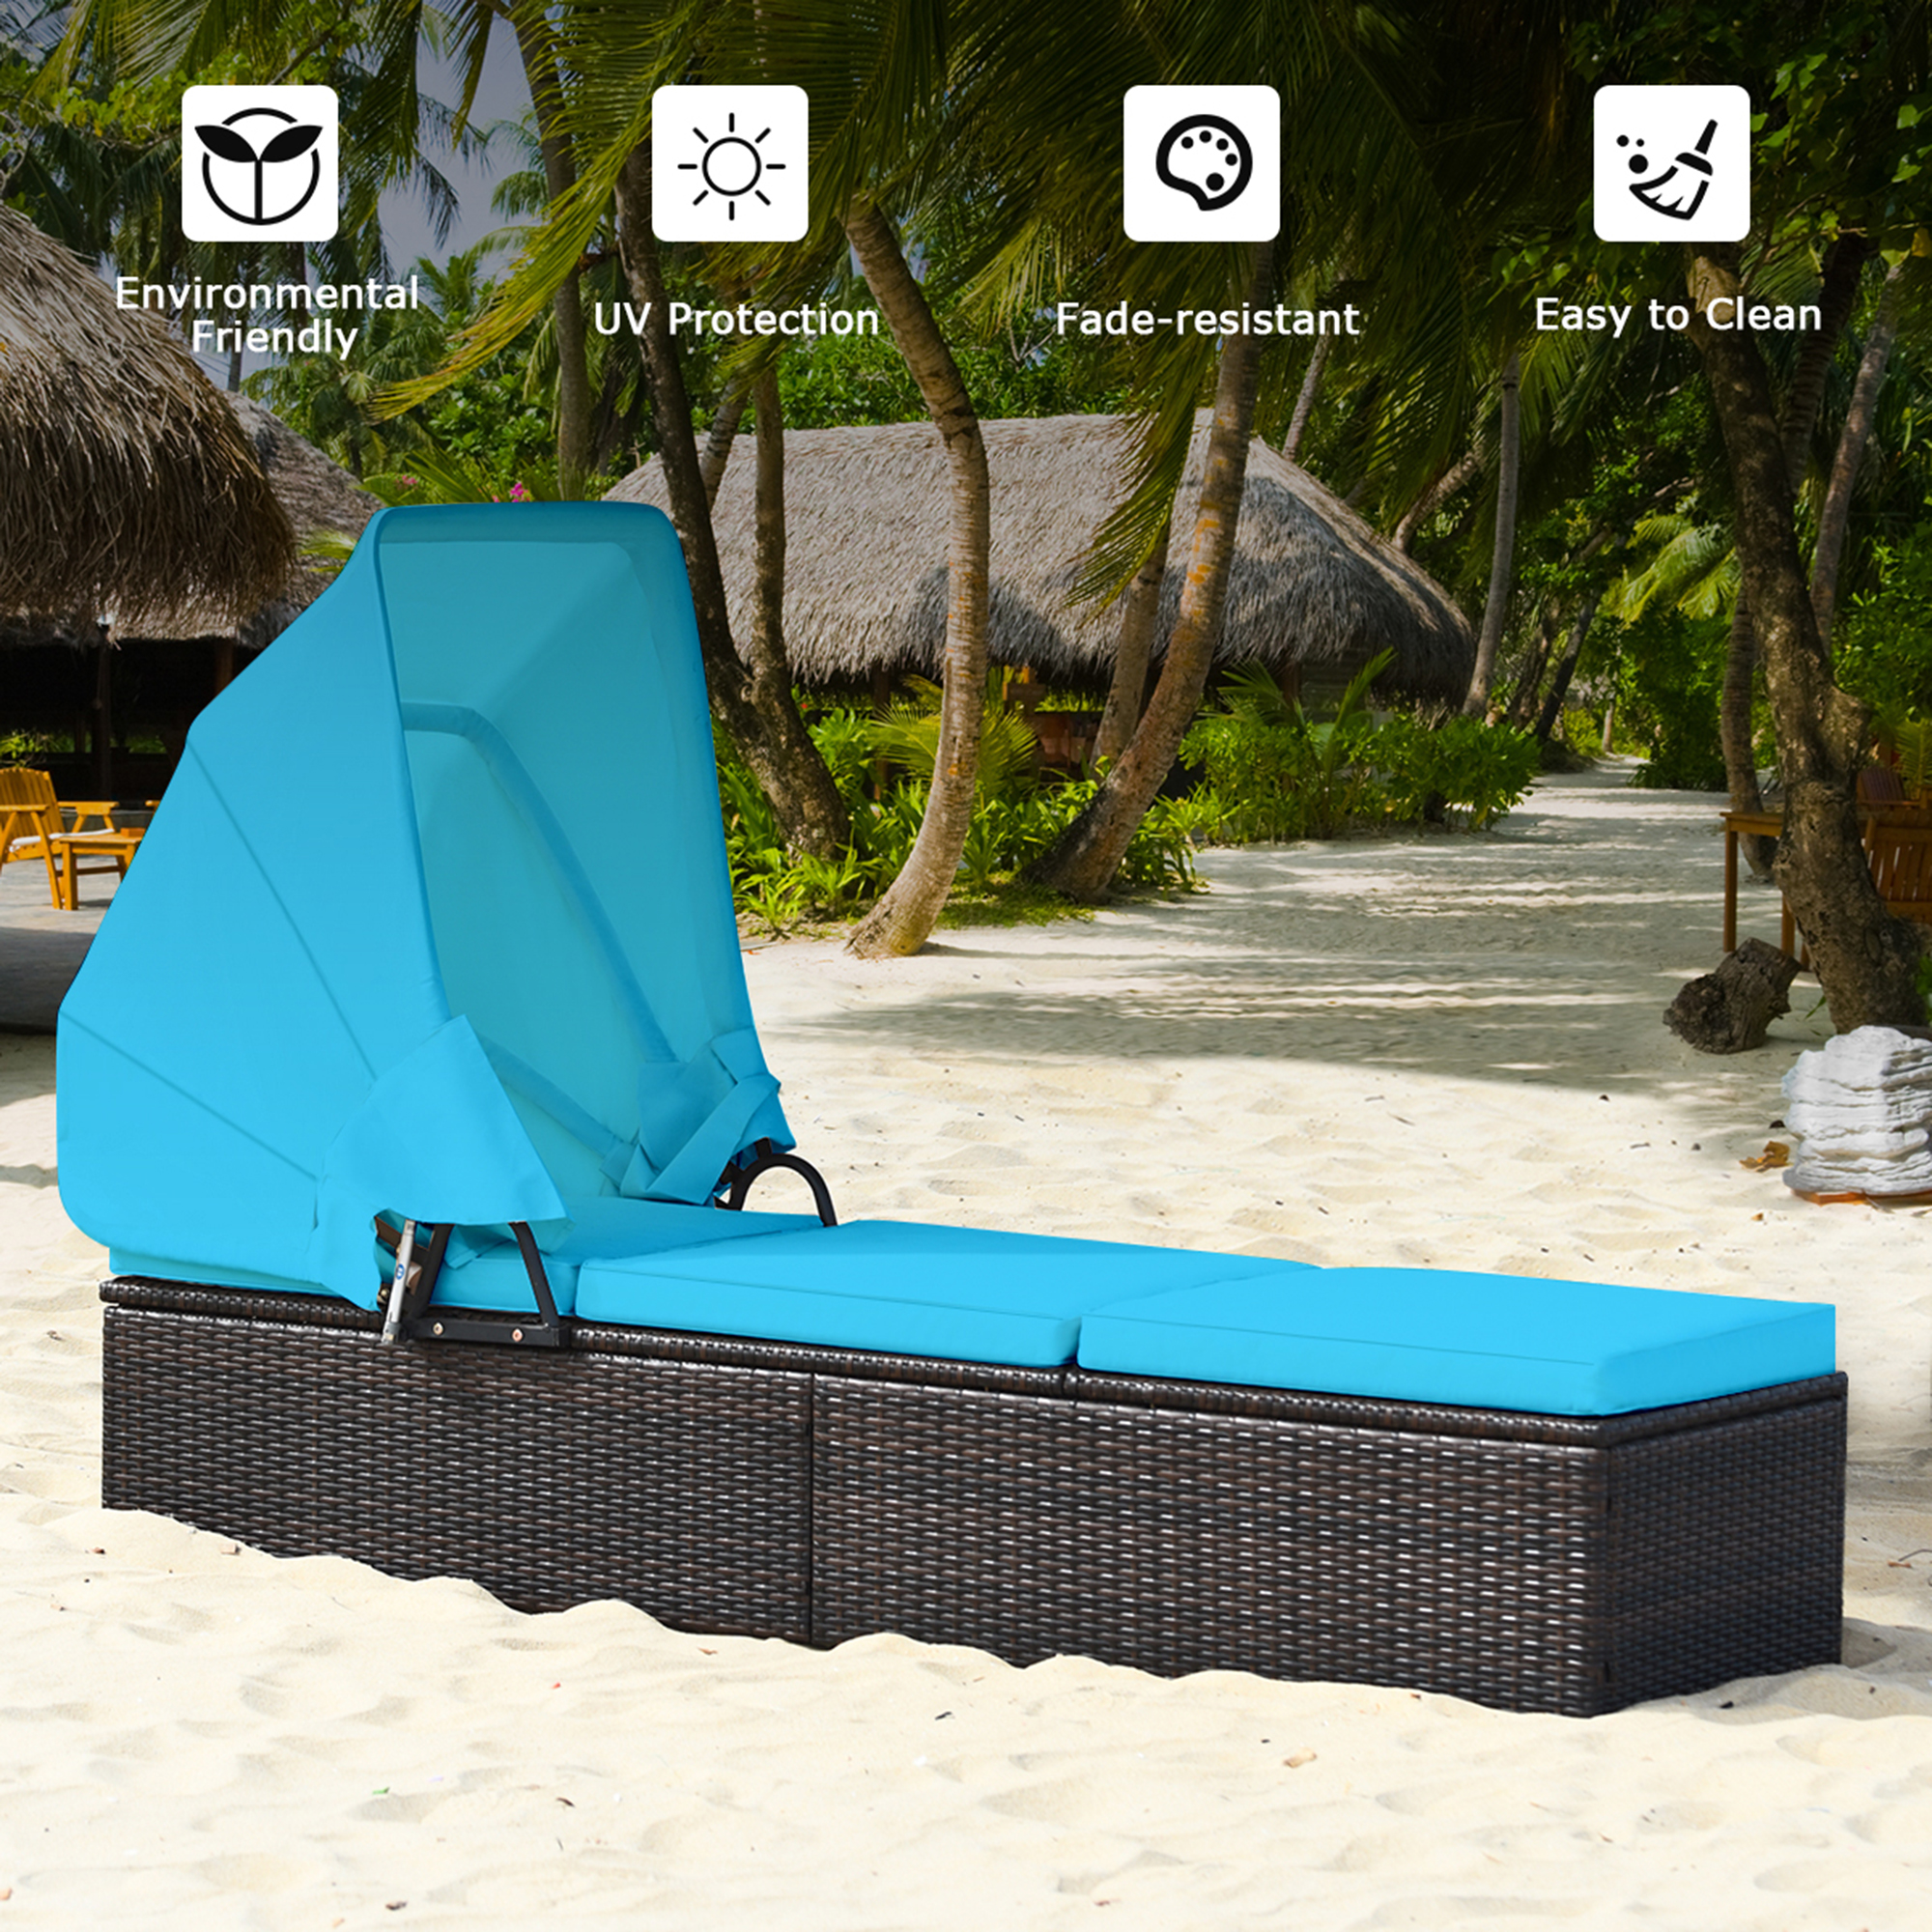 Gymax Rattan Patio Chaise Lounge Chair W/ Adjustable Canopy Turquoise Cushion - image 4 of 10